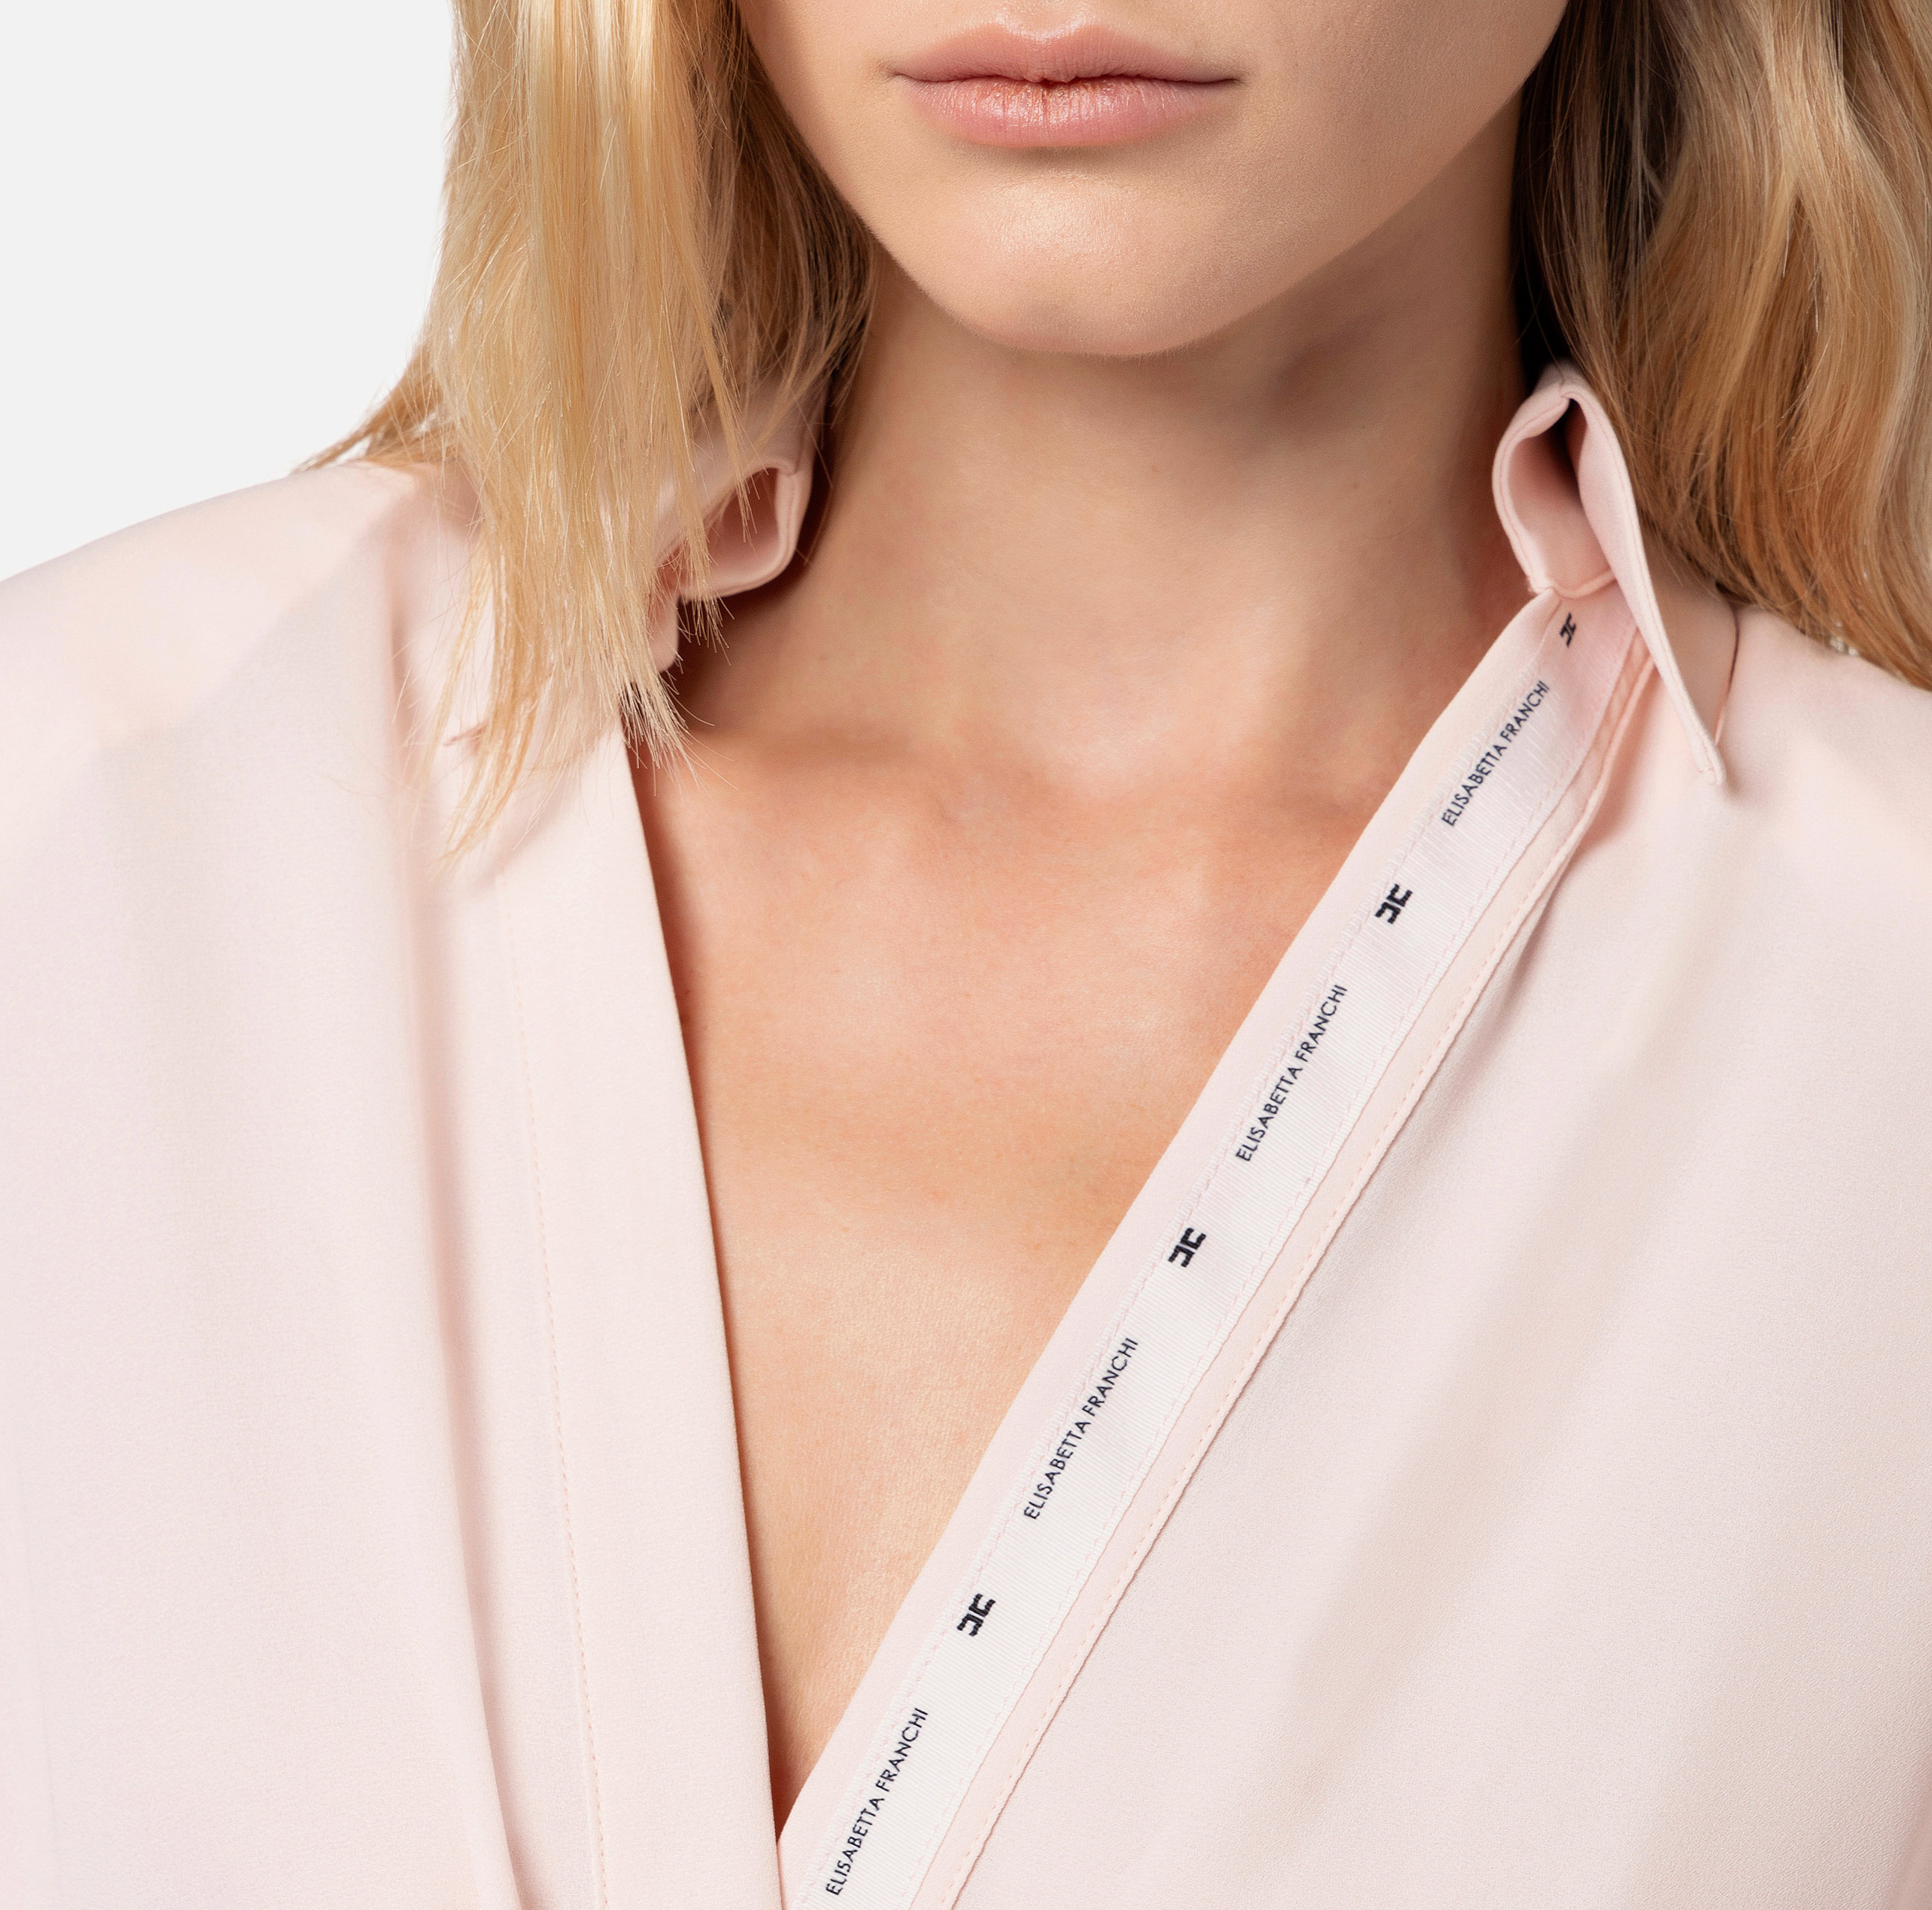 Crossed bodysuit-style shirt in georgette fabric with logoed ribbon - Elisabetta Franchi